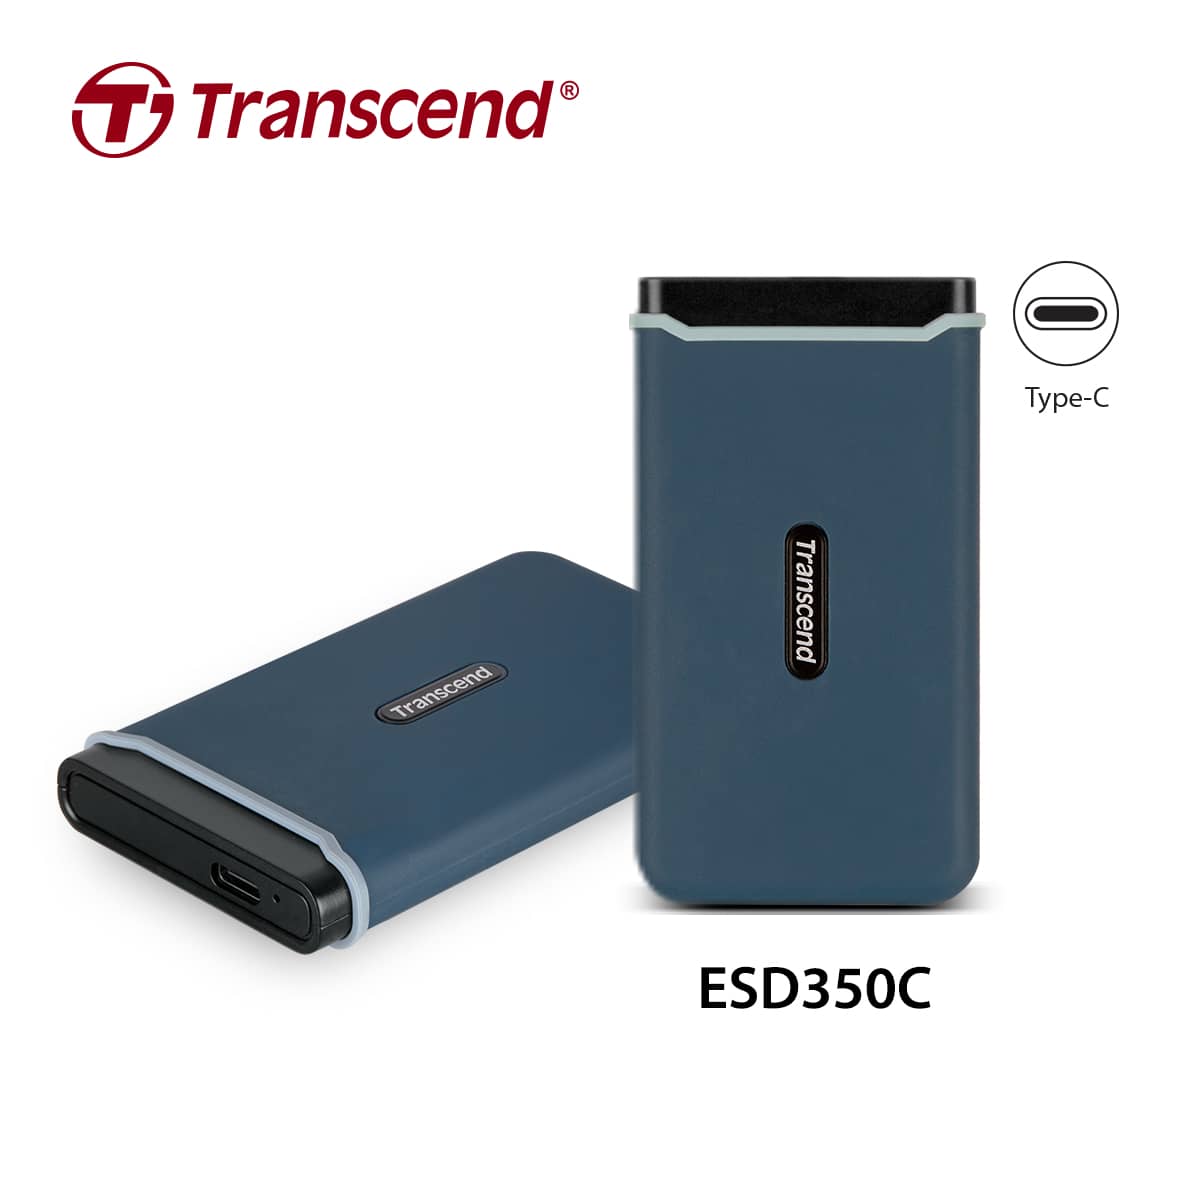 Transcend Launches ESD350C Portable SSD for Breakneck Speeds